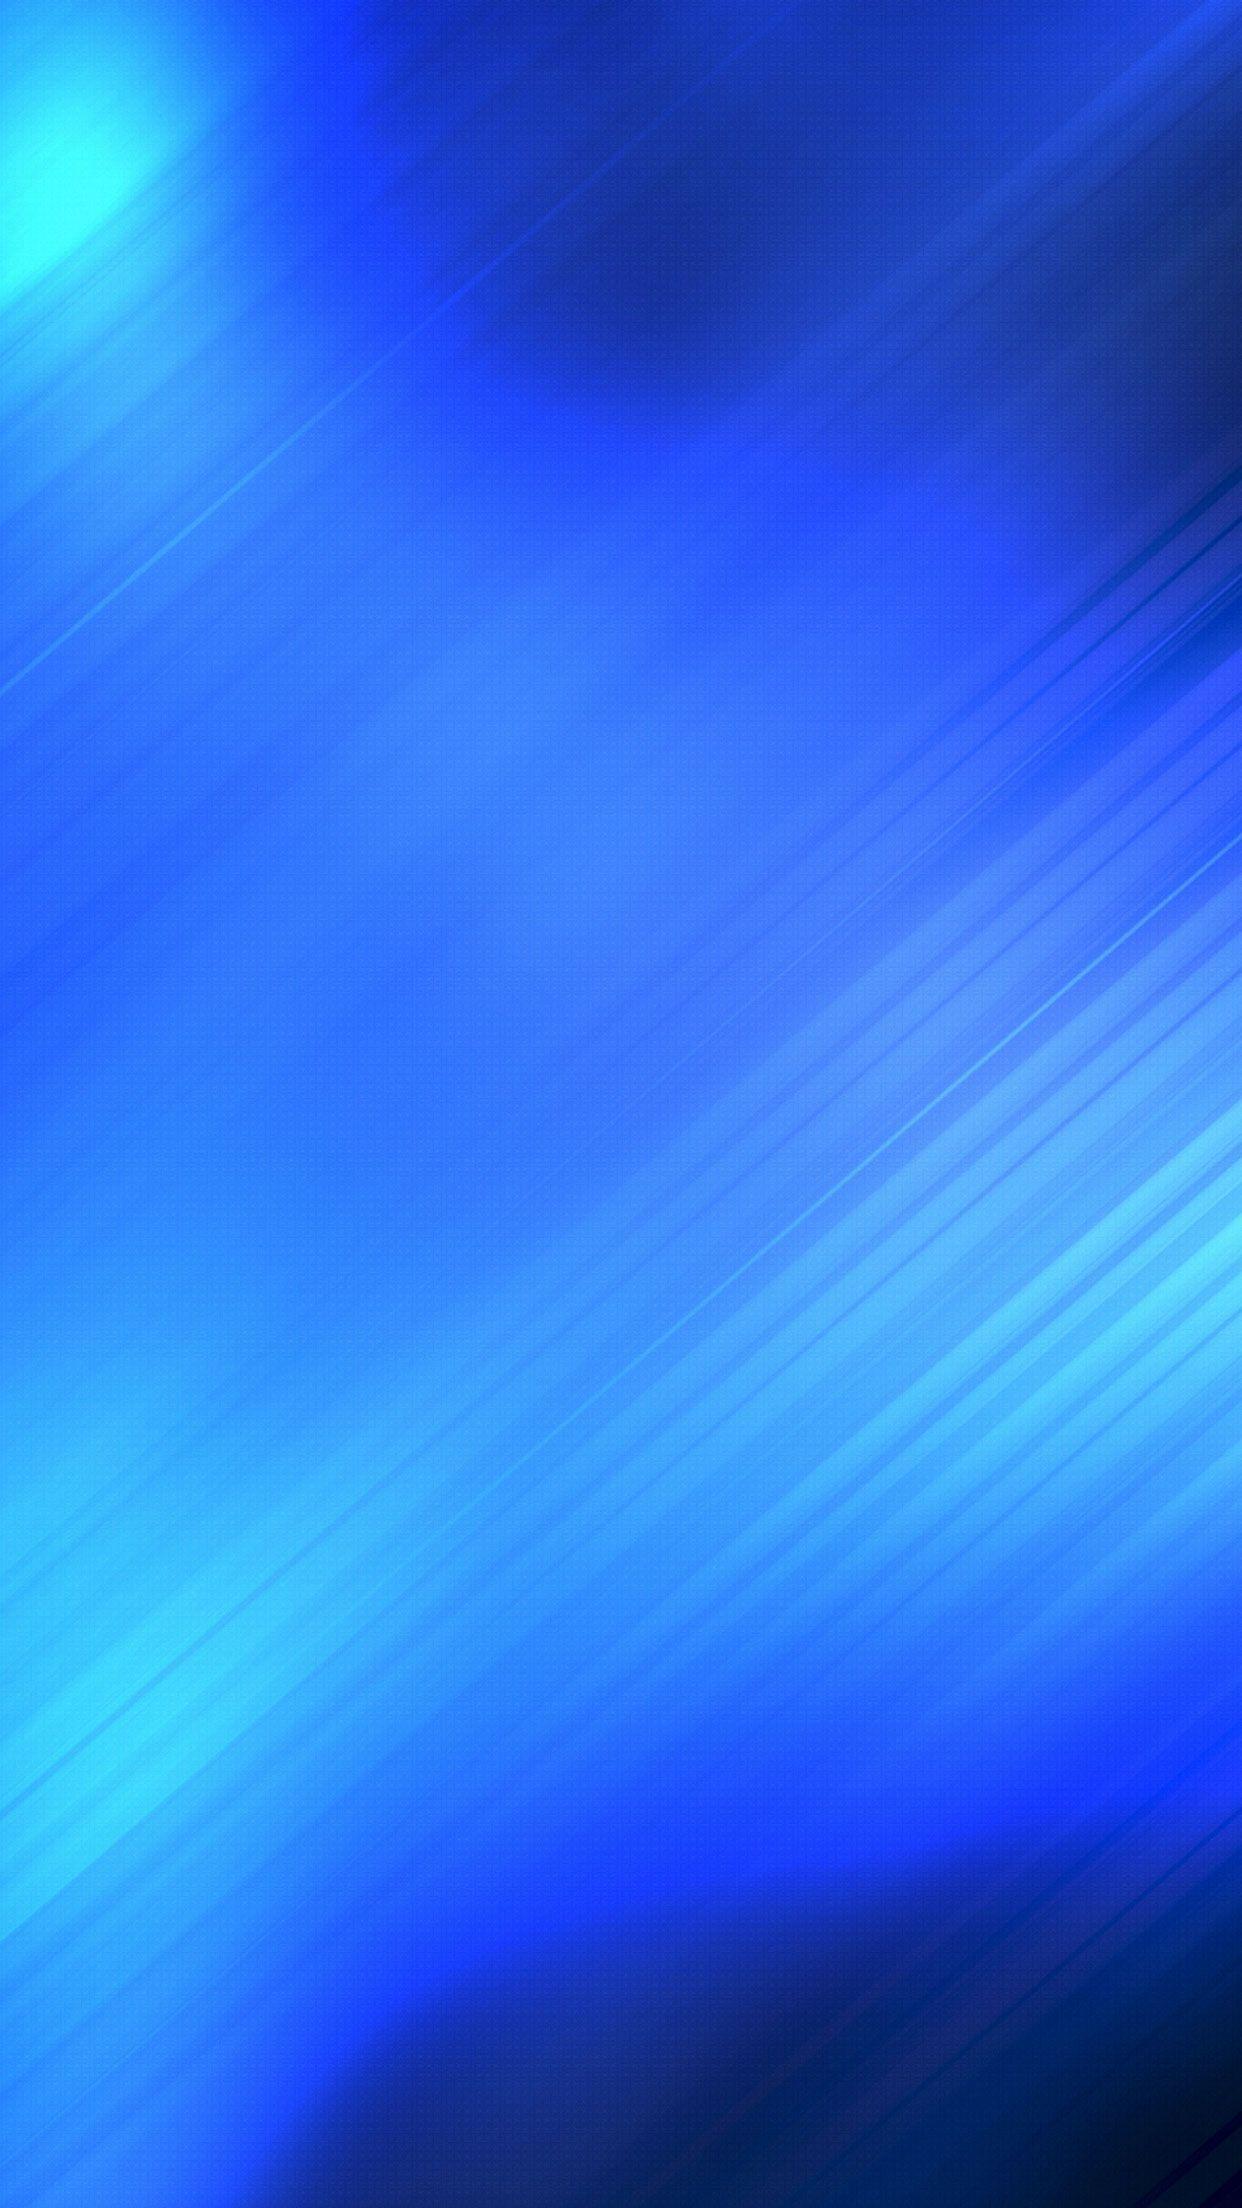 Blue Abstract lines wallpaper #iPhone #android #blue #abstract